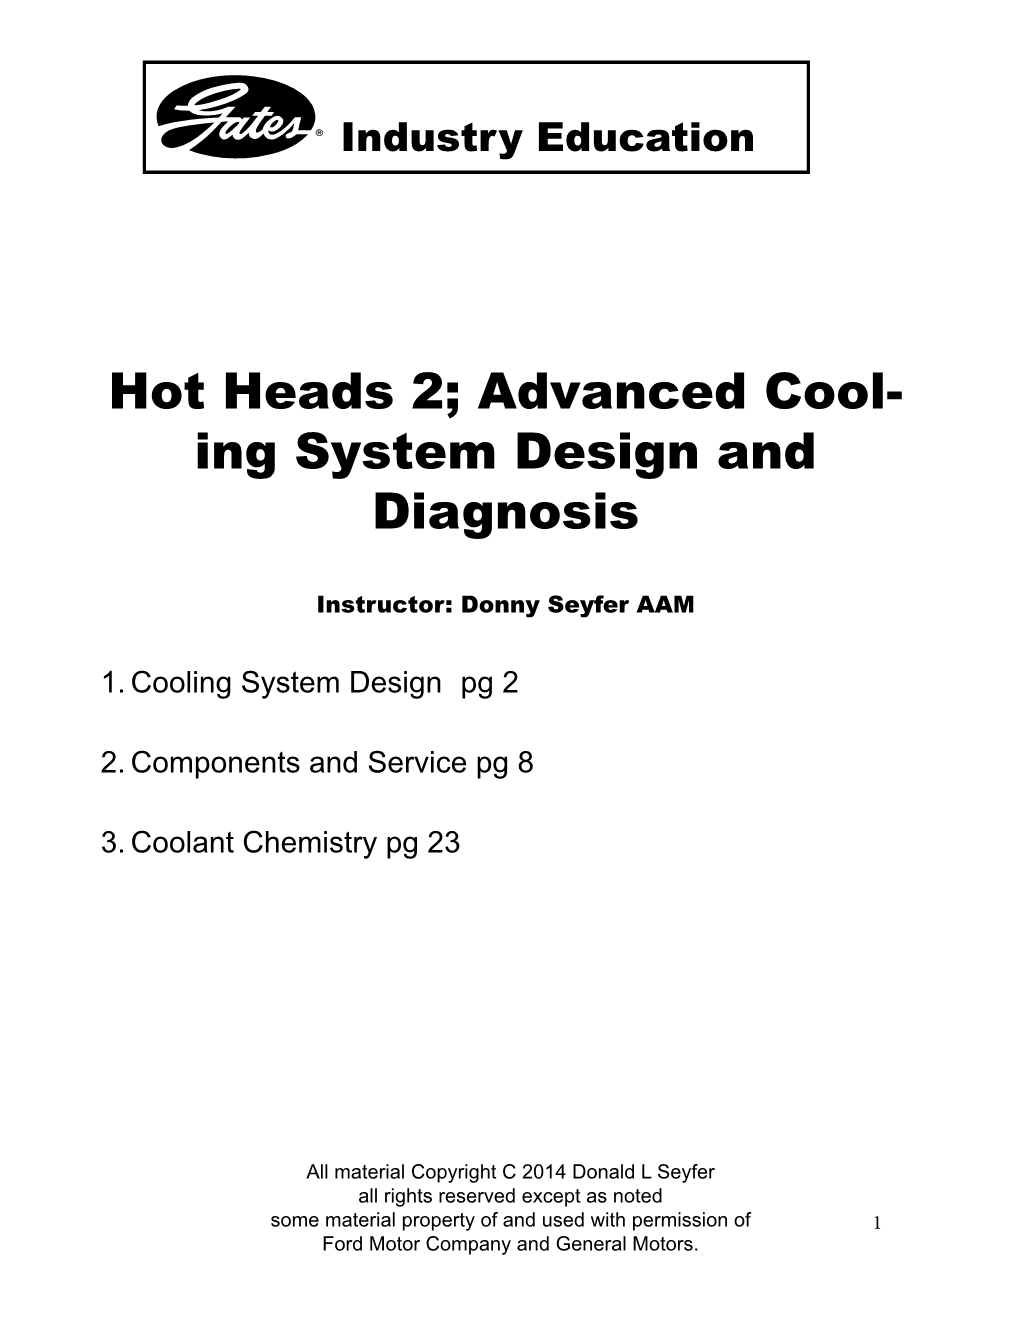 Hot Heads 2; Advanced Cool- Ing System Design and Diagnosis